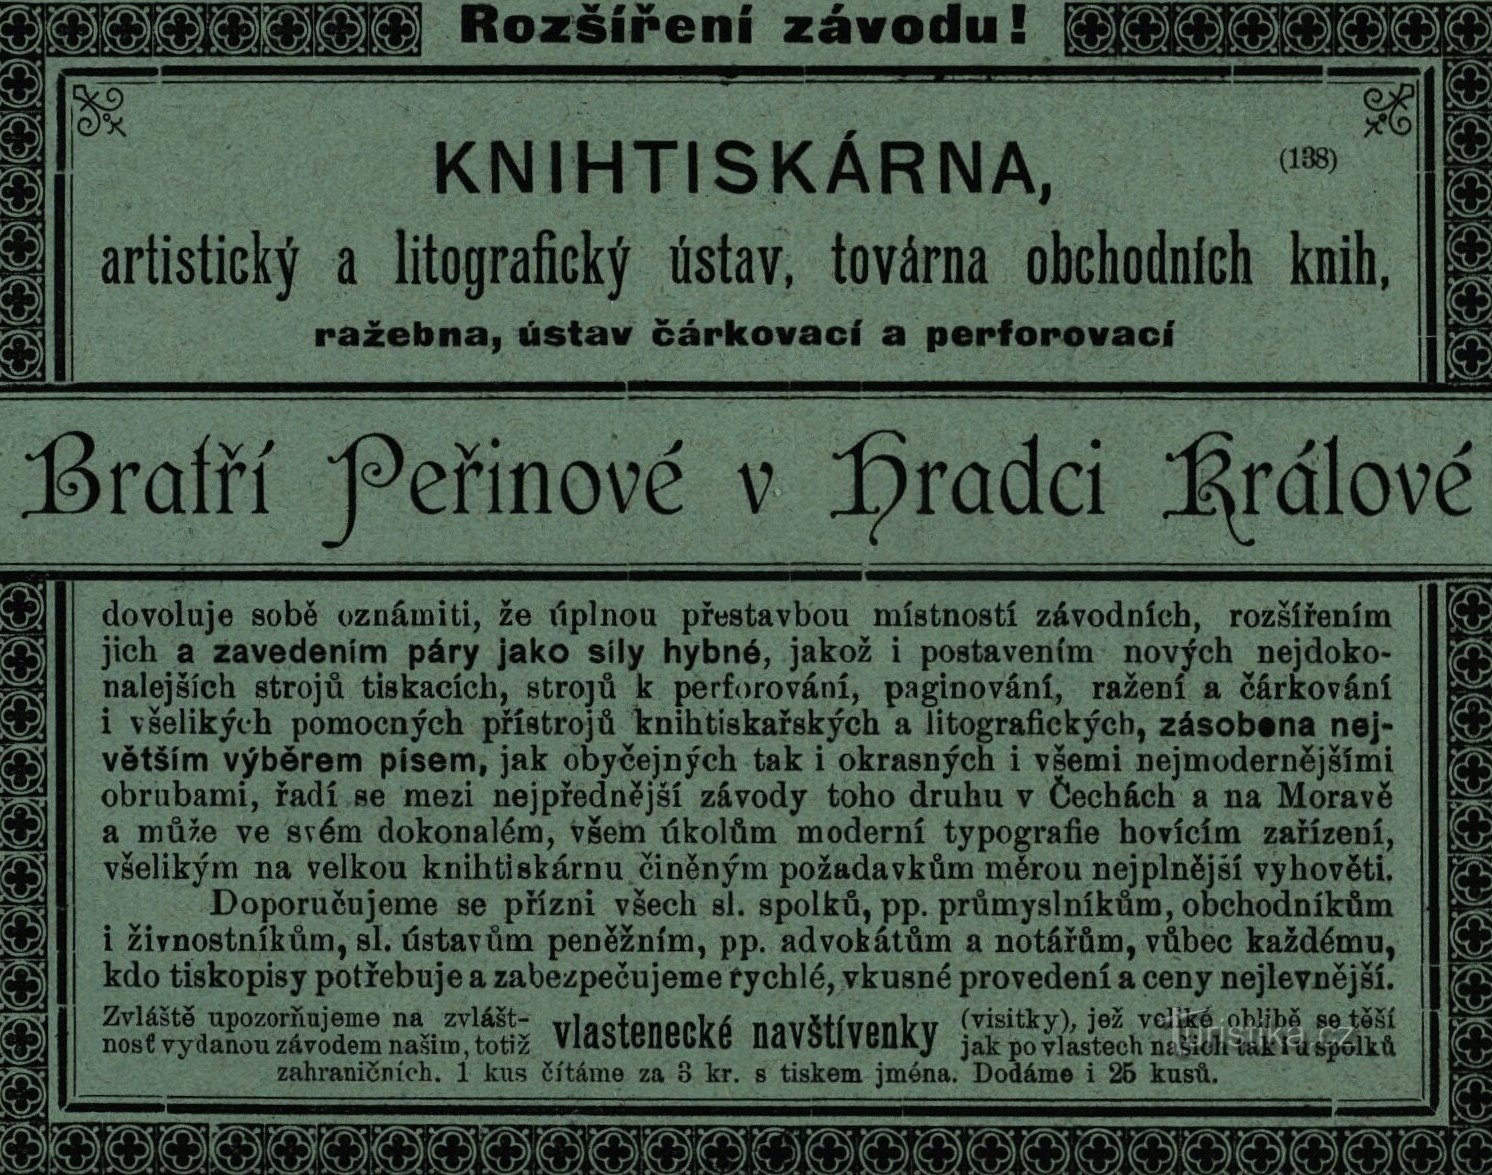 Periodeannonce fra 1896